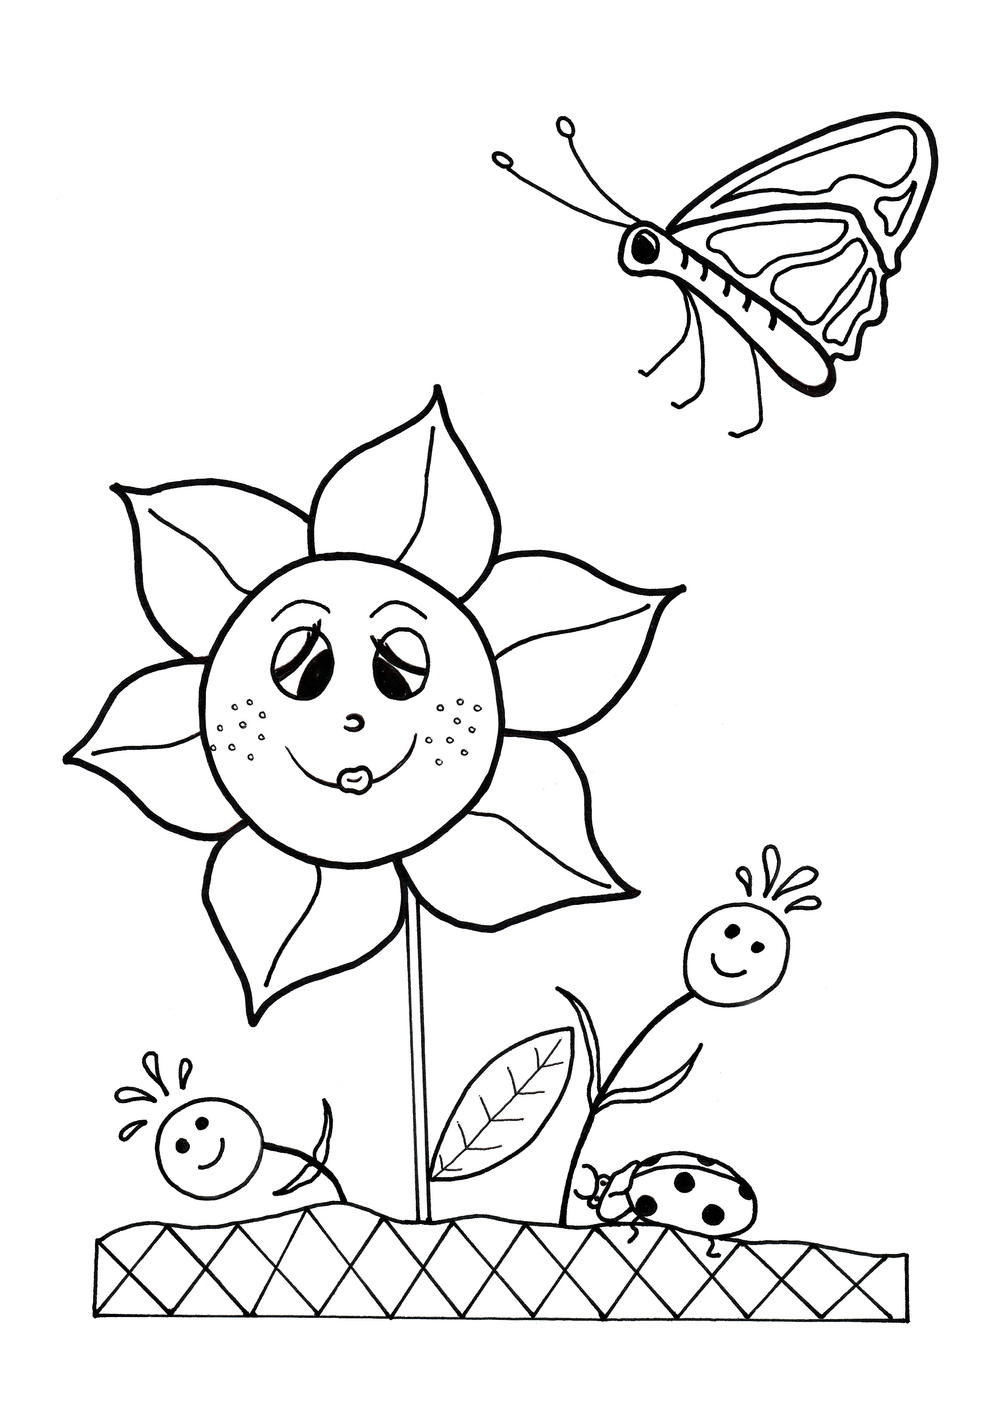 Spring Kids Coloring Pages
 Dancing Flowers Spring Coloring Sheet